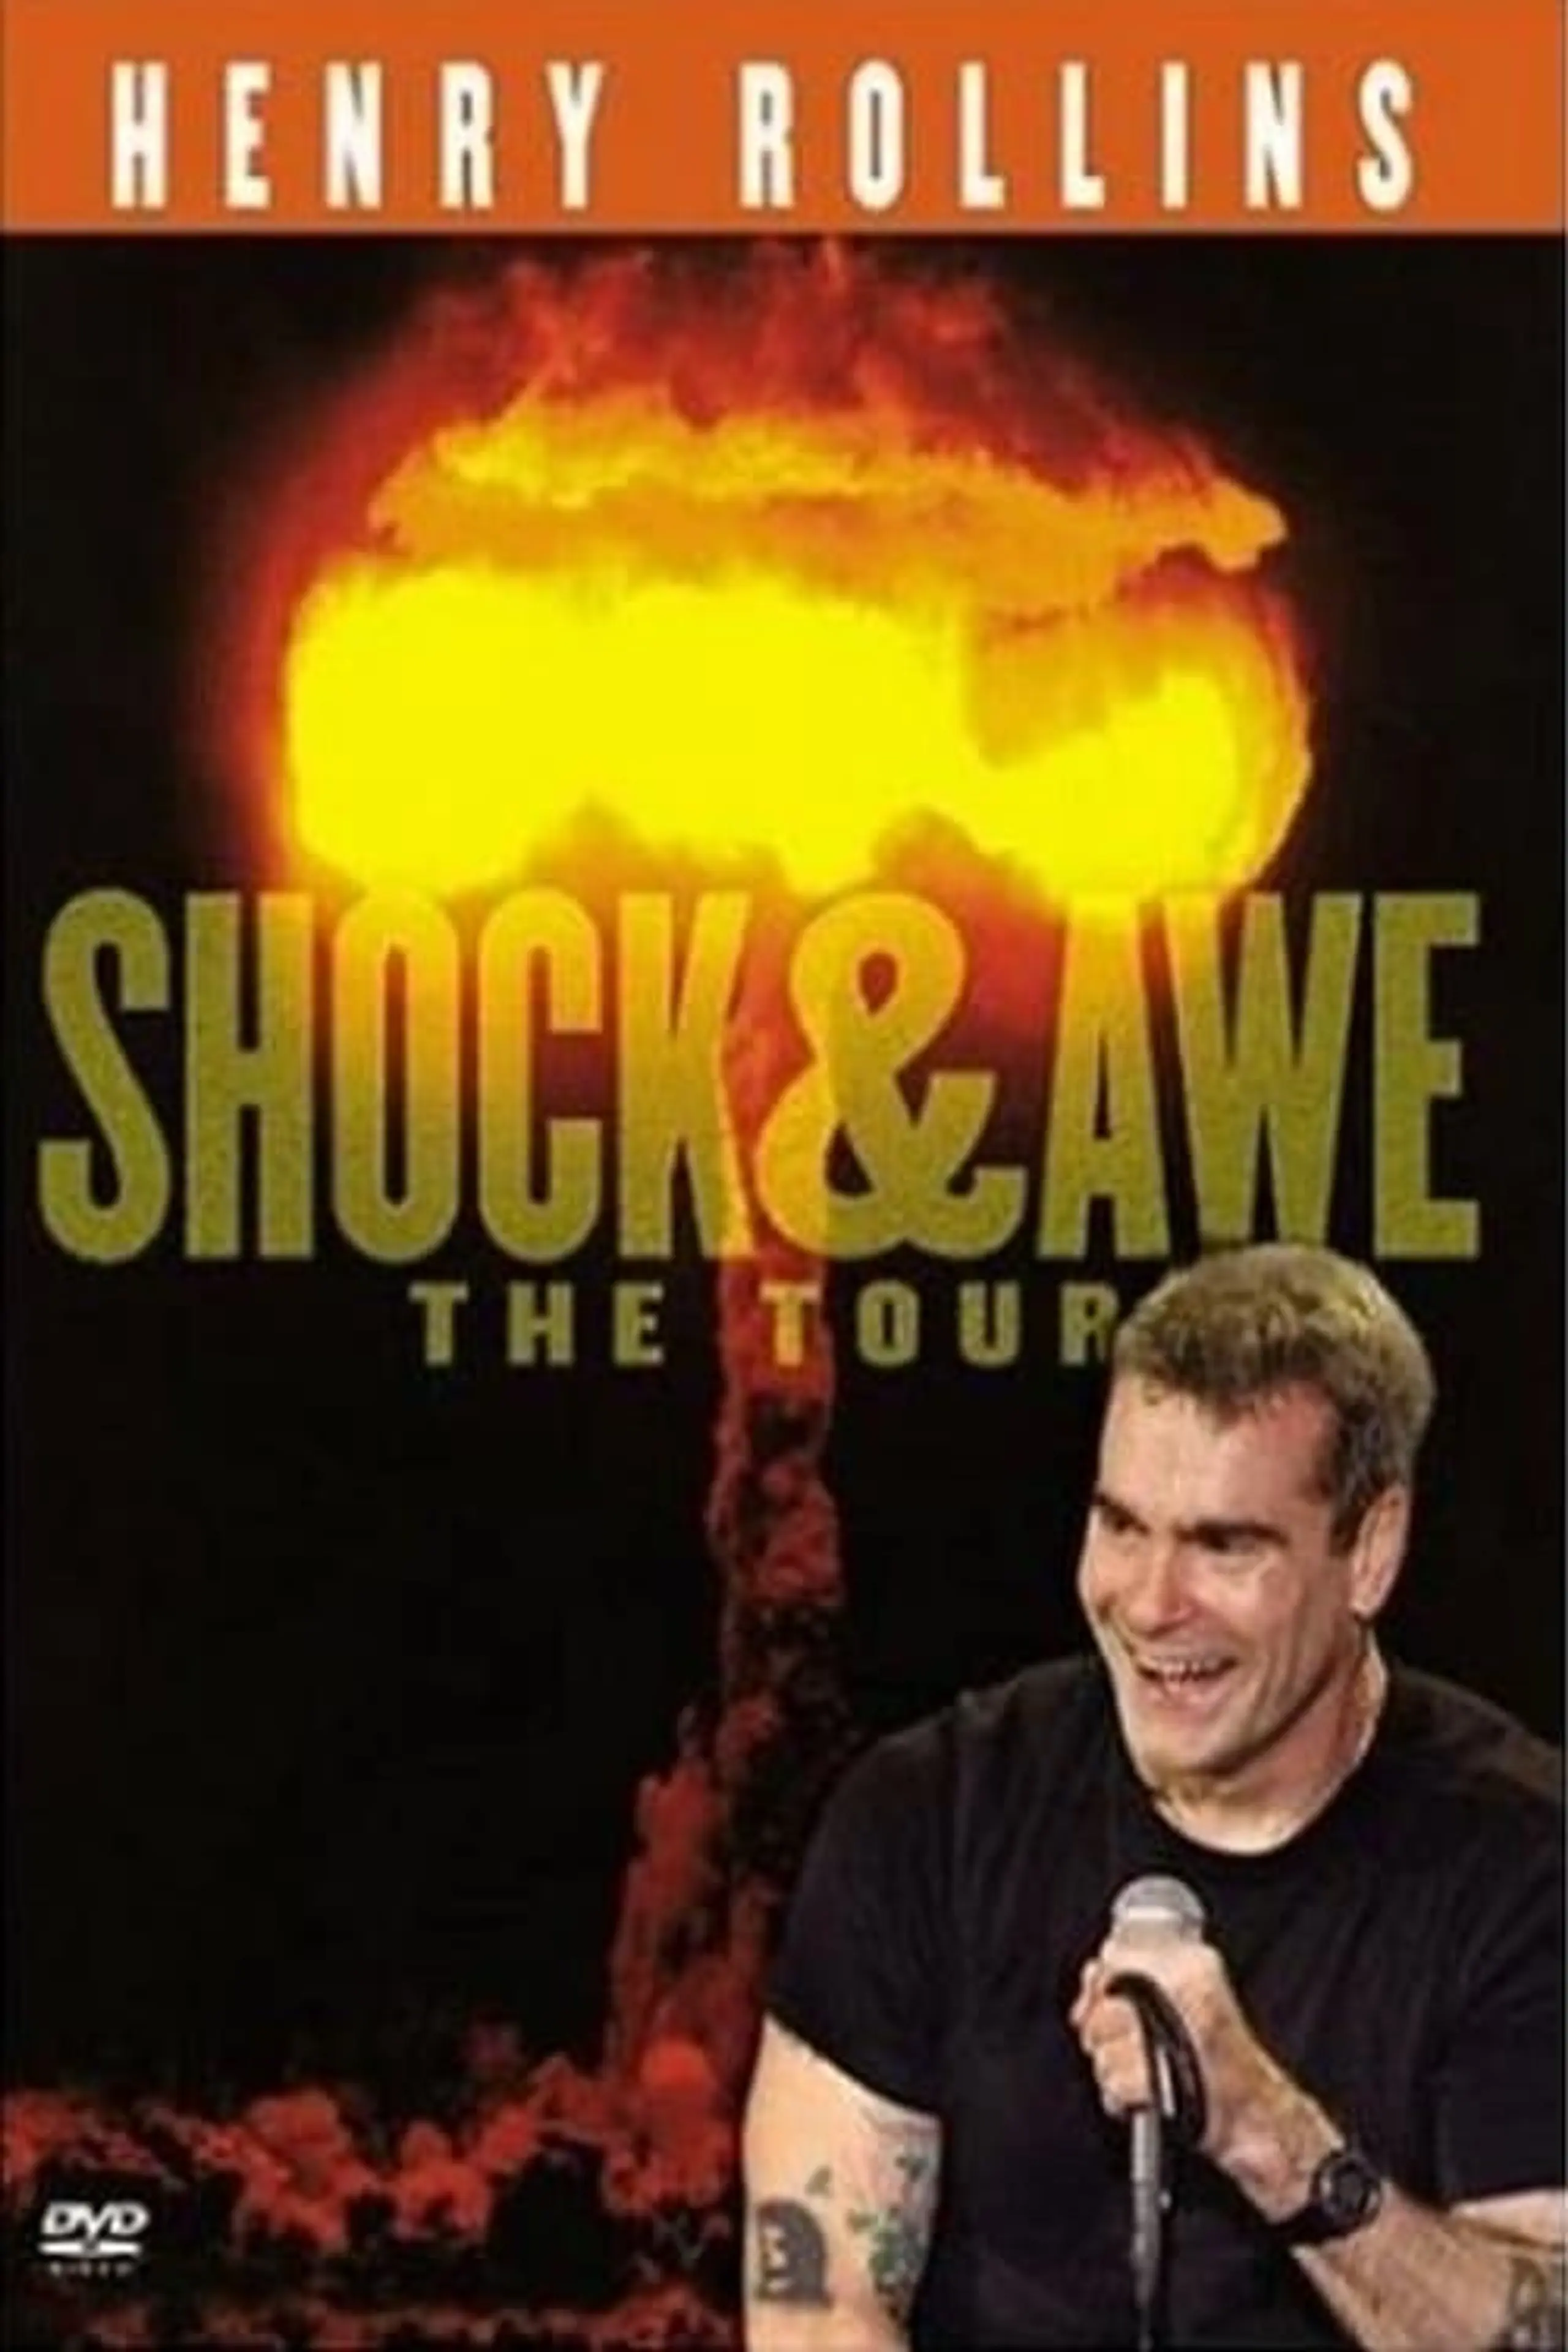 Henry Rollins: Shock and Awe